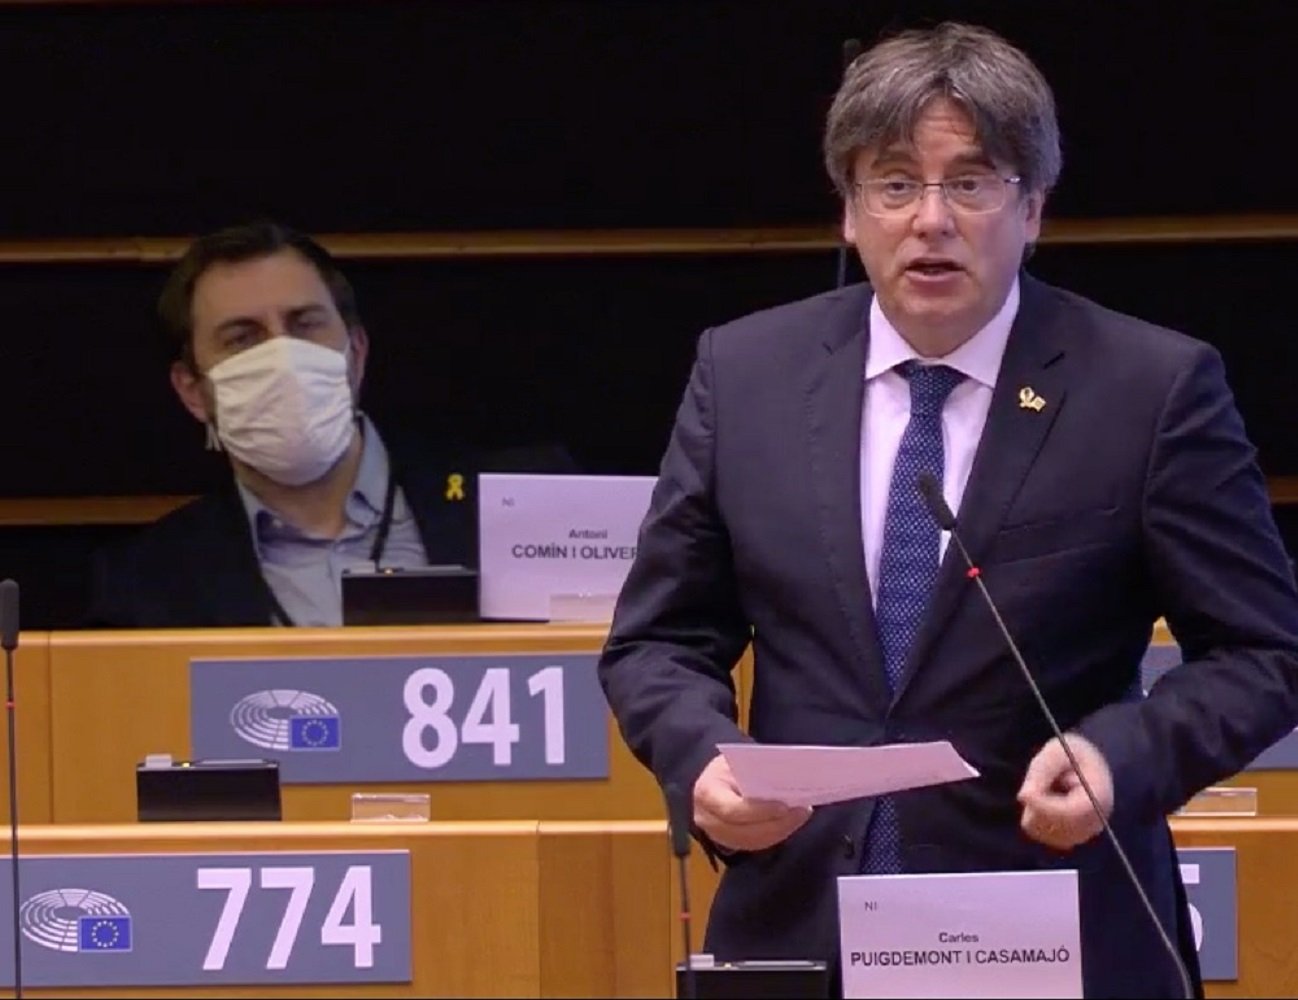 Puigdemont recovers his immunity as an MEP by decision of EU General Court